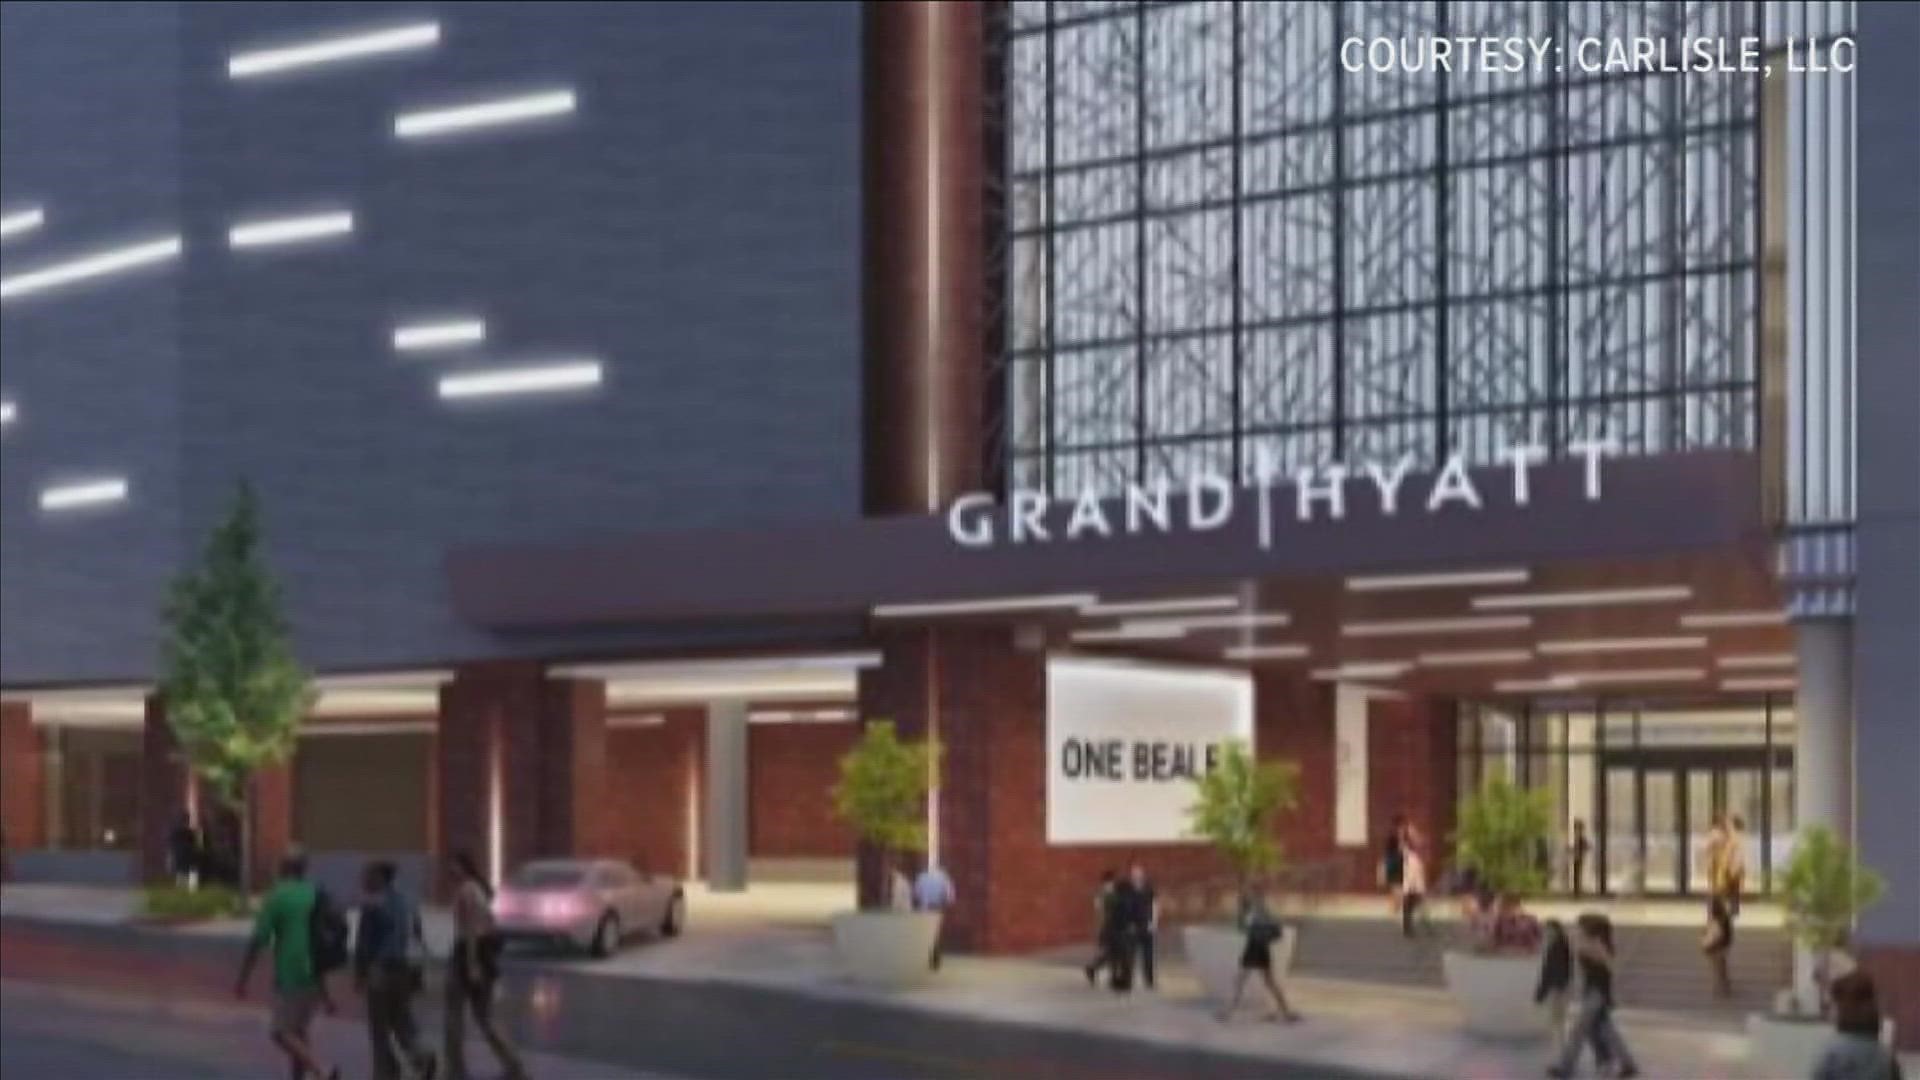 Richard Ransom explains what he thinks about the Grand Hyatt hotel project planned for downtown.